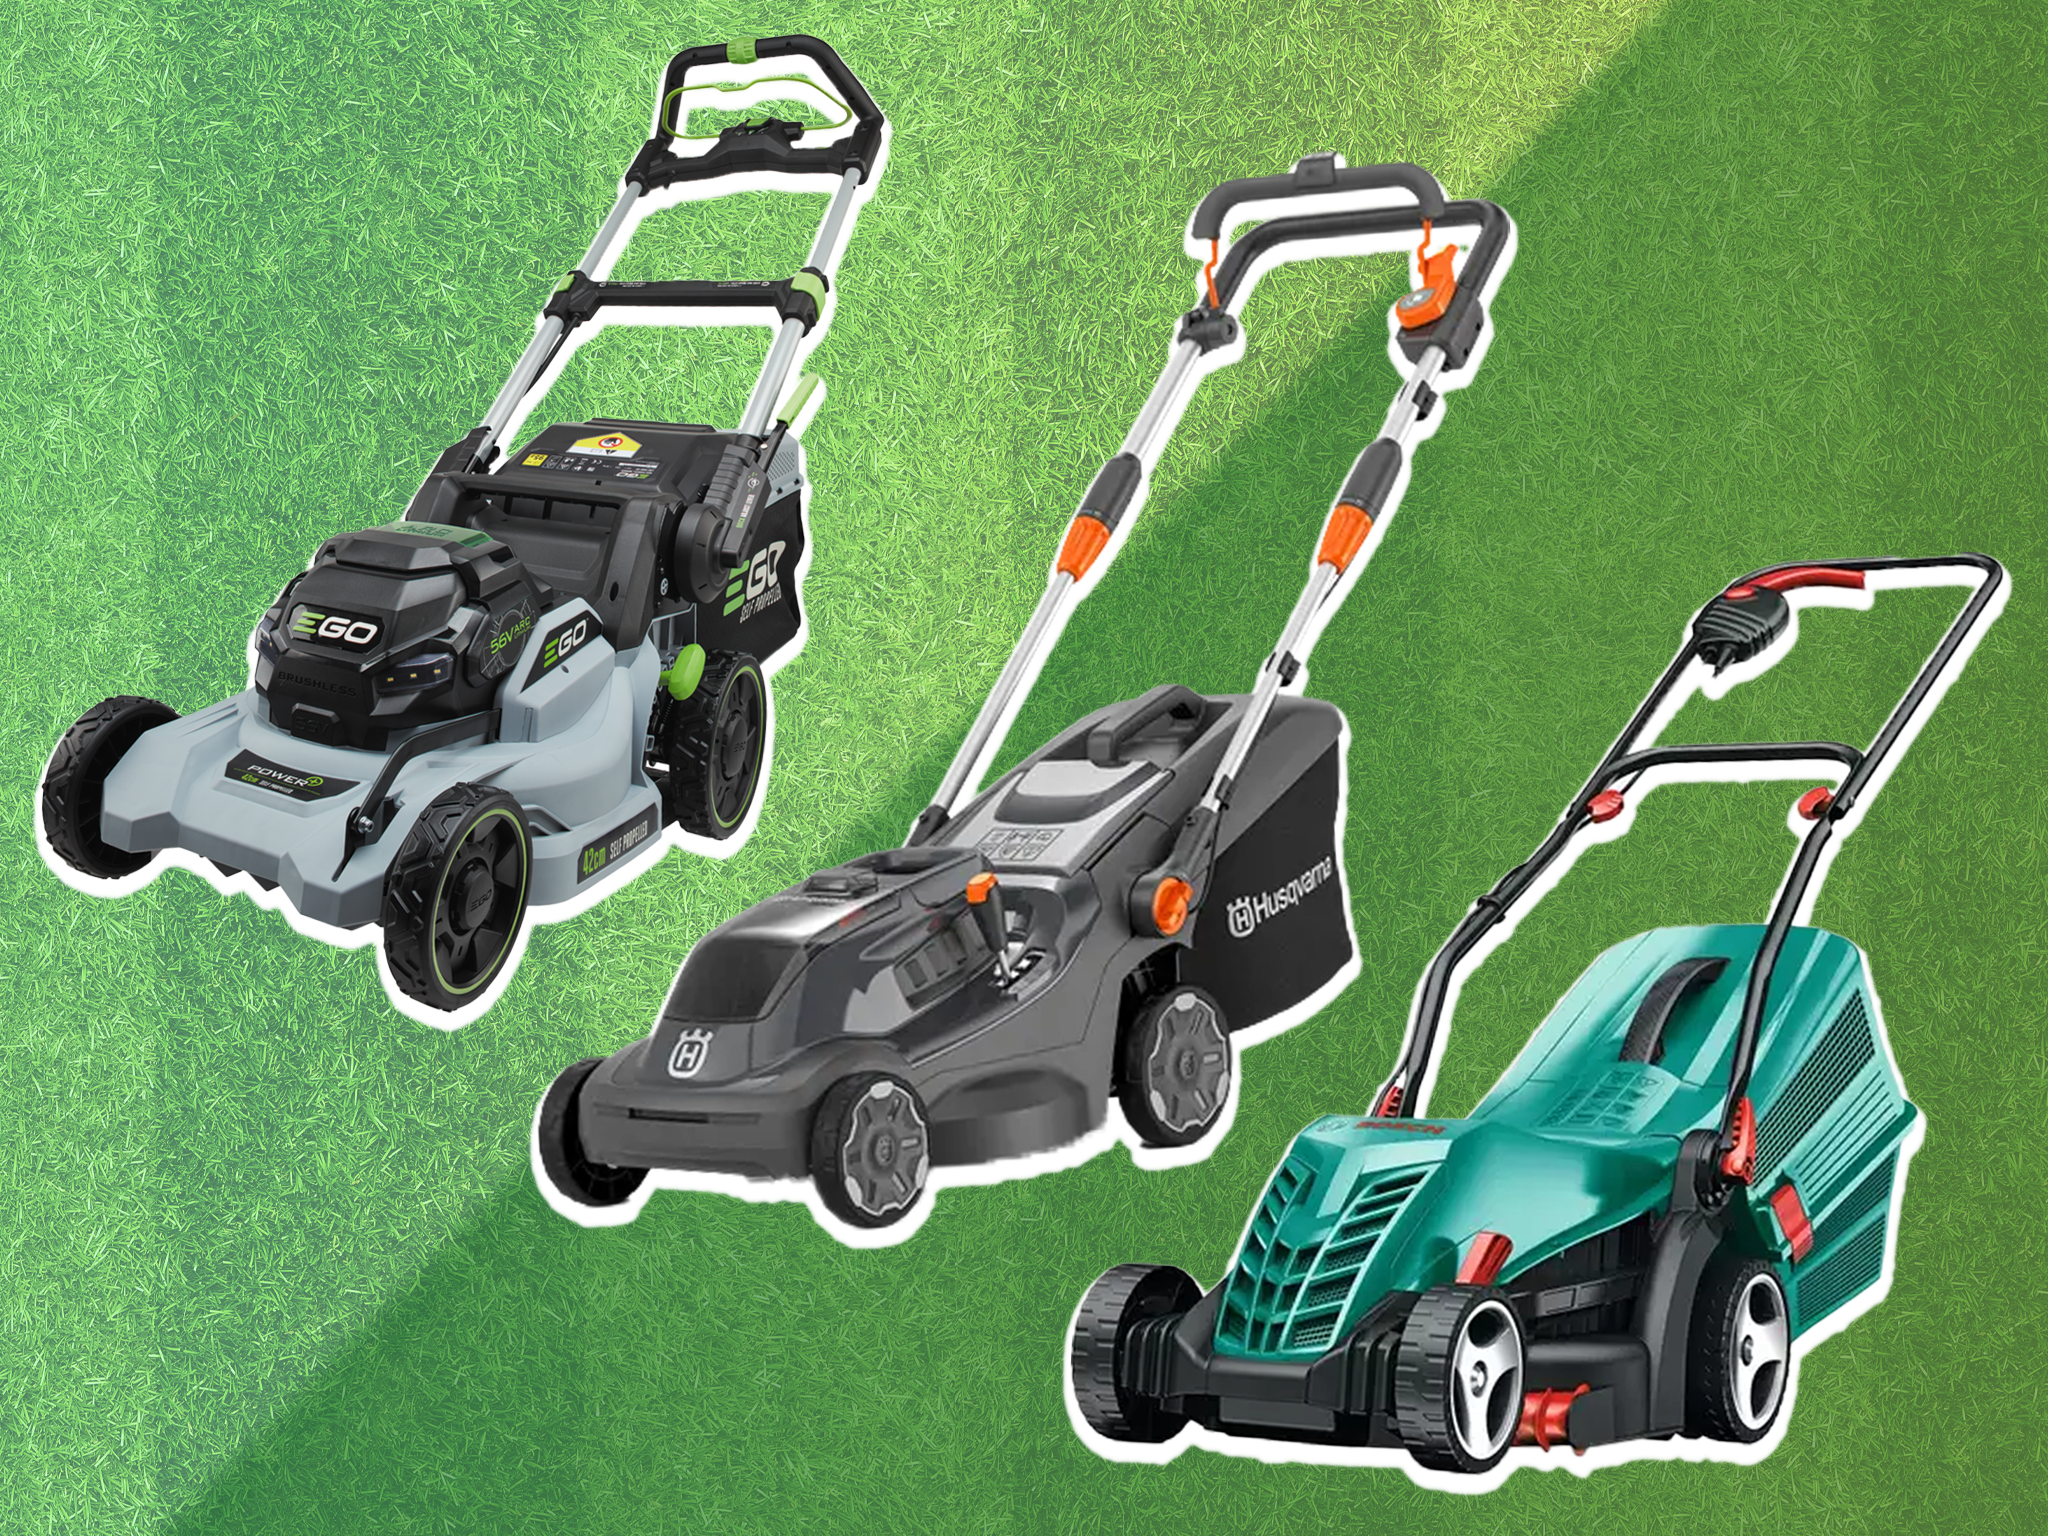 From mulching functions to battery-powered models, these power tools will make light work of your garden